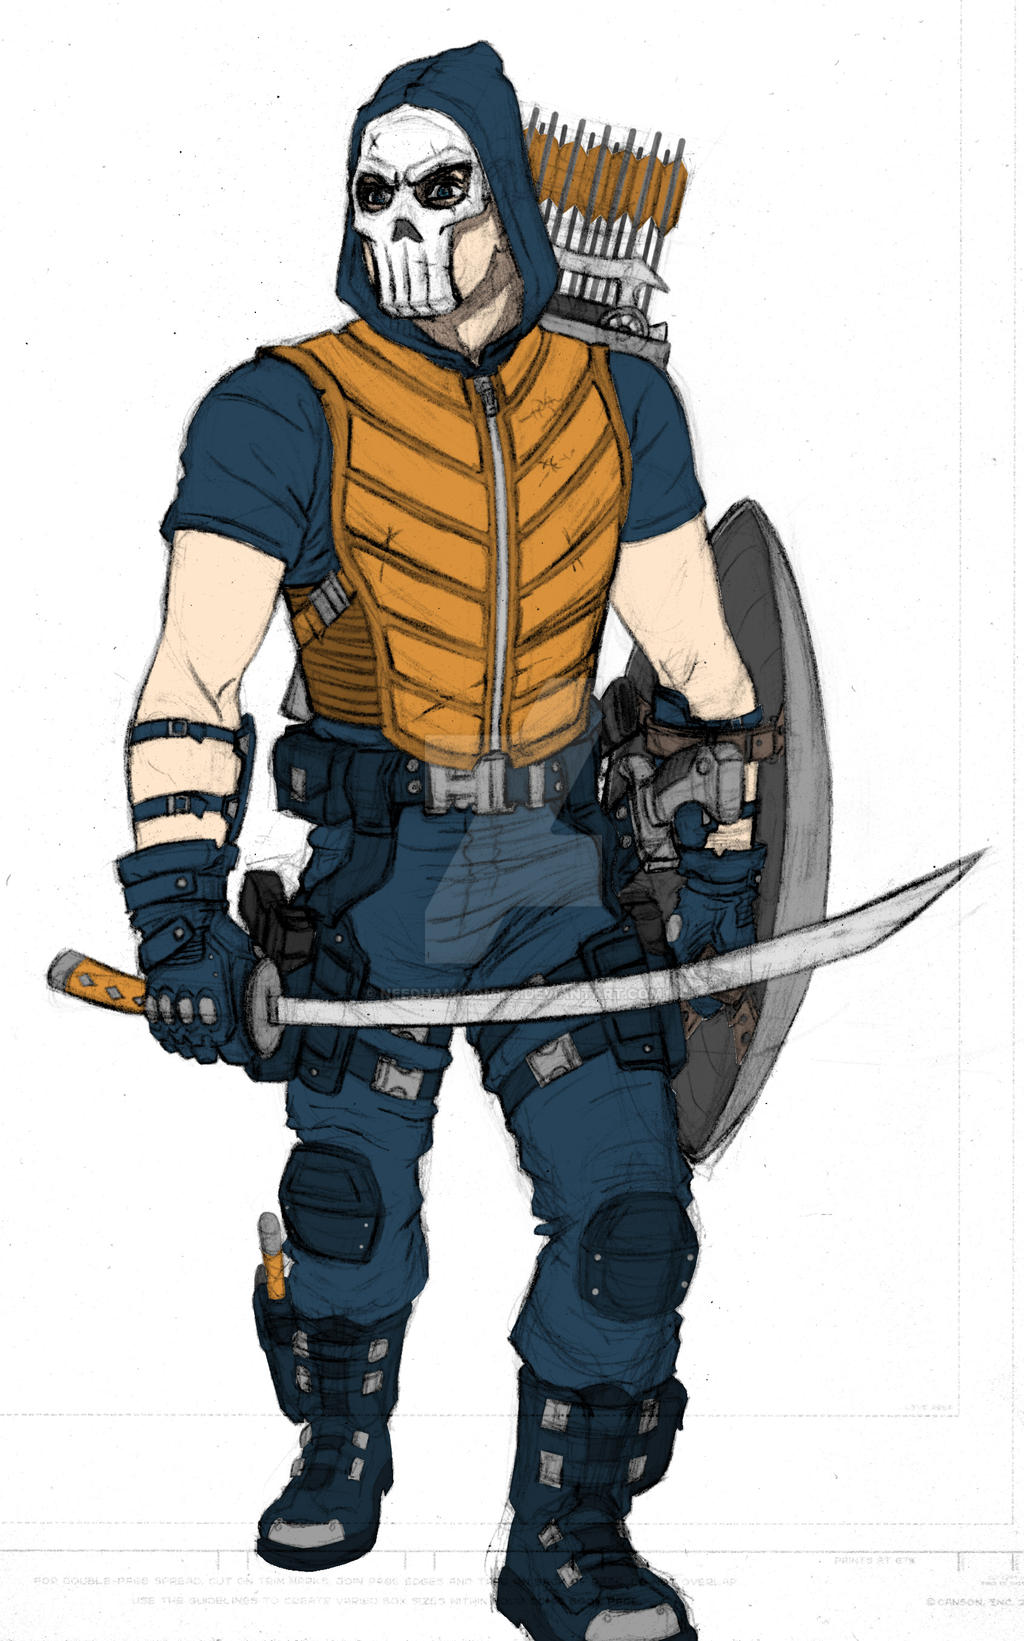 Taskmaster for Agents of SHIELD by Needham-Comics on DeviantArt